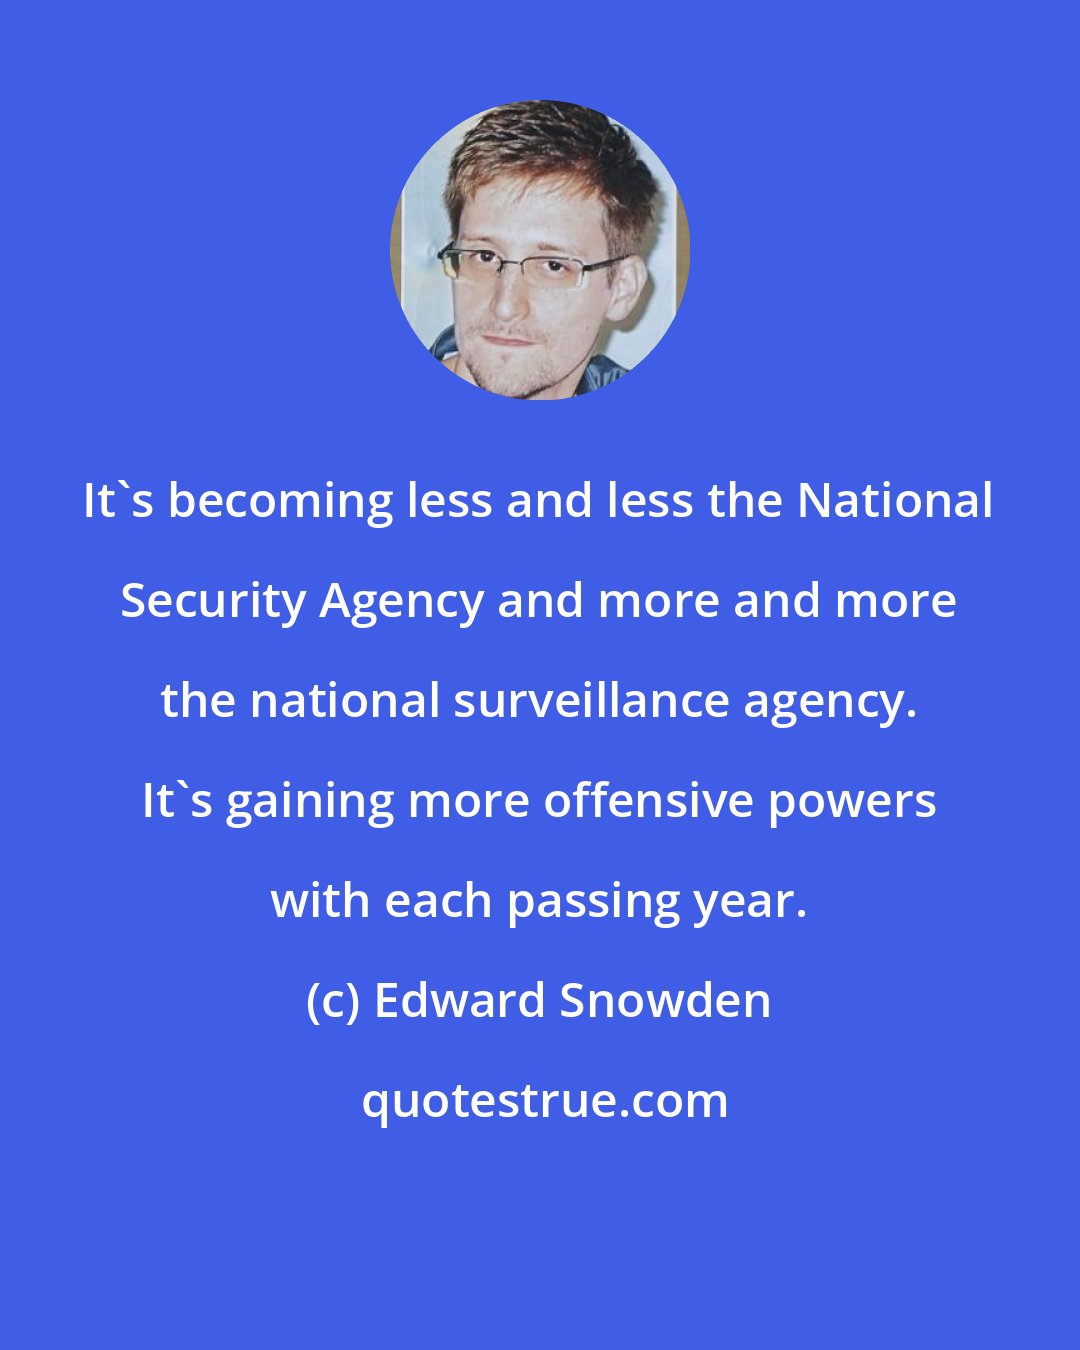 Edward Snowden: It's becoming less and less the National Security Agency and more and more the national surveillance agency. It's gaining more offensive powers with each passing year.